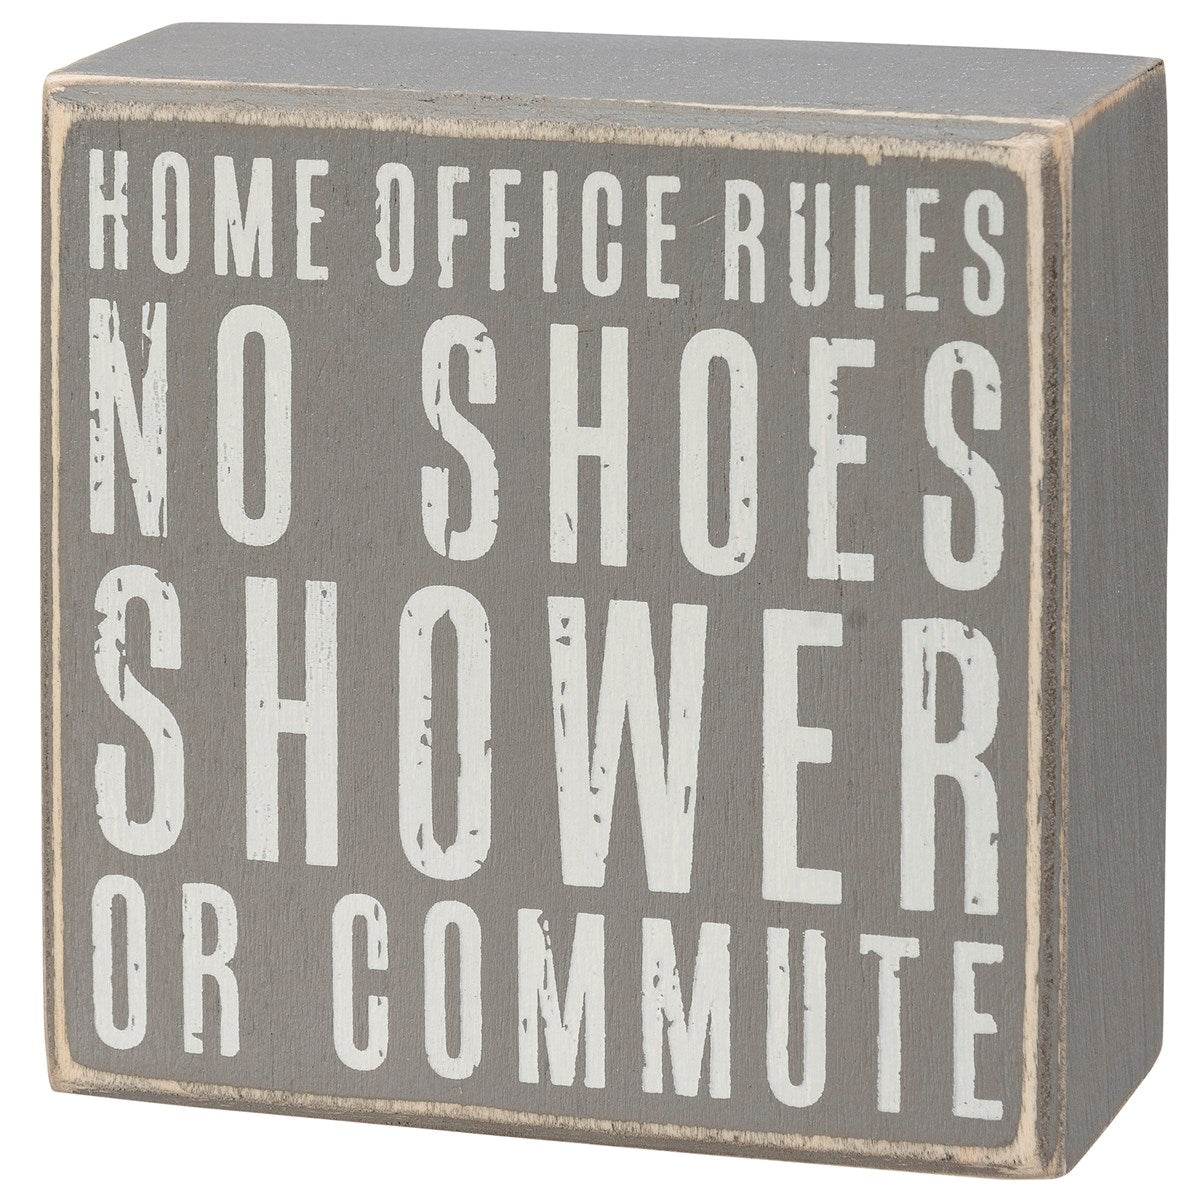 Home Office Rules Wood Sign